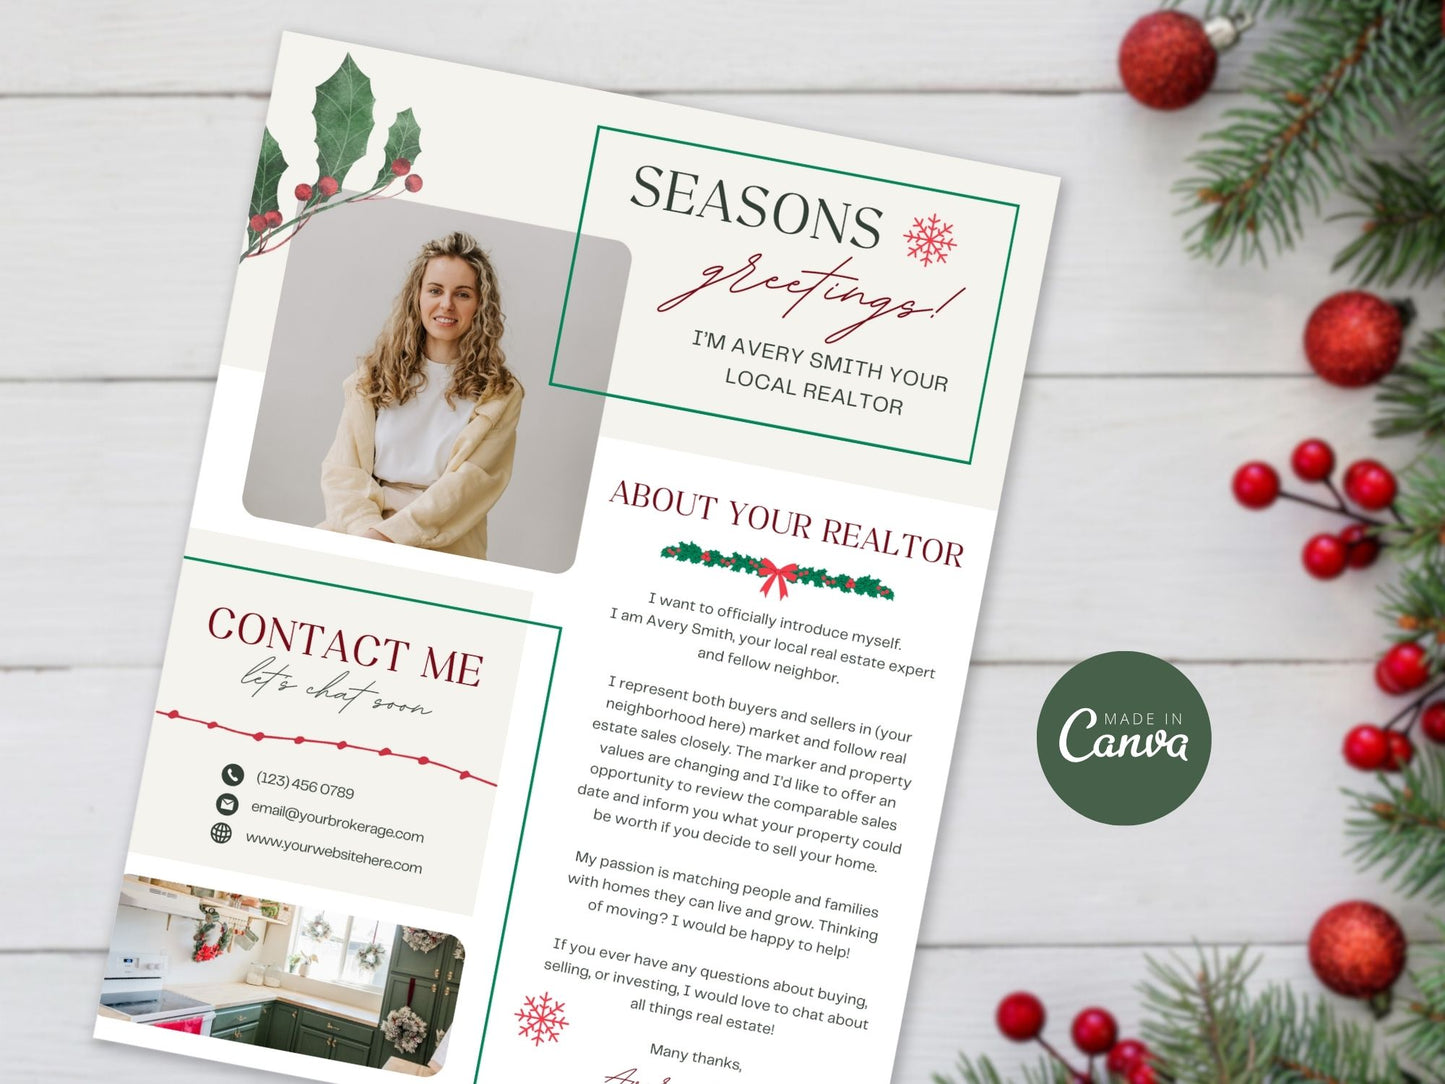 Real Estate Winter Holiday Letter - Expressing Warm Holiday Greetings and Gratitude to Clients and the Community